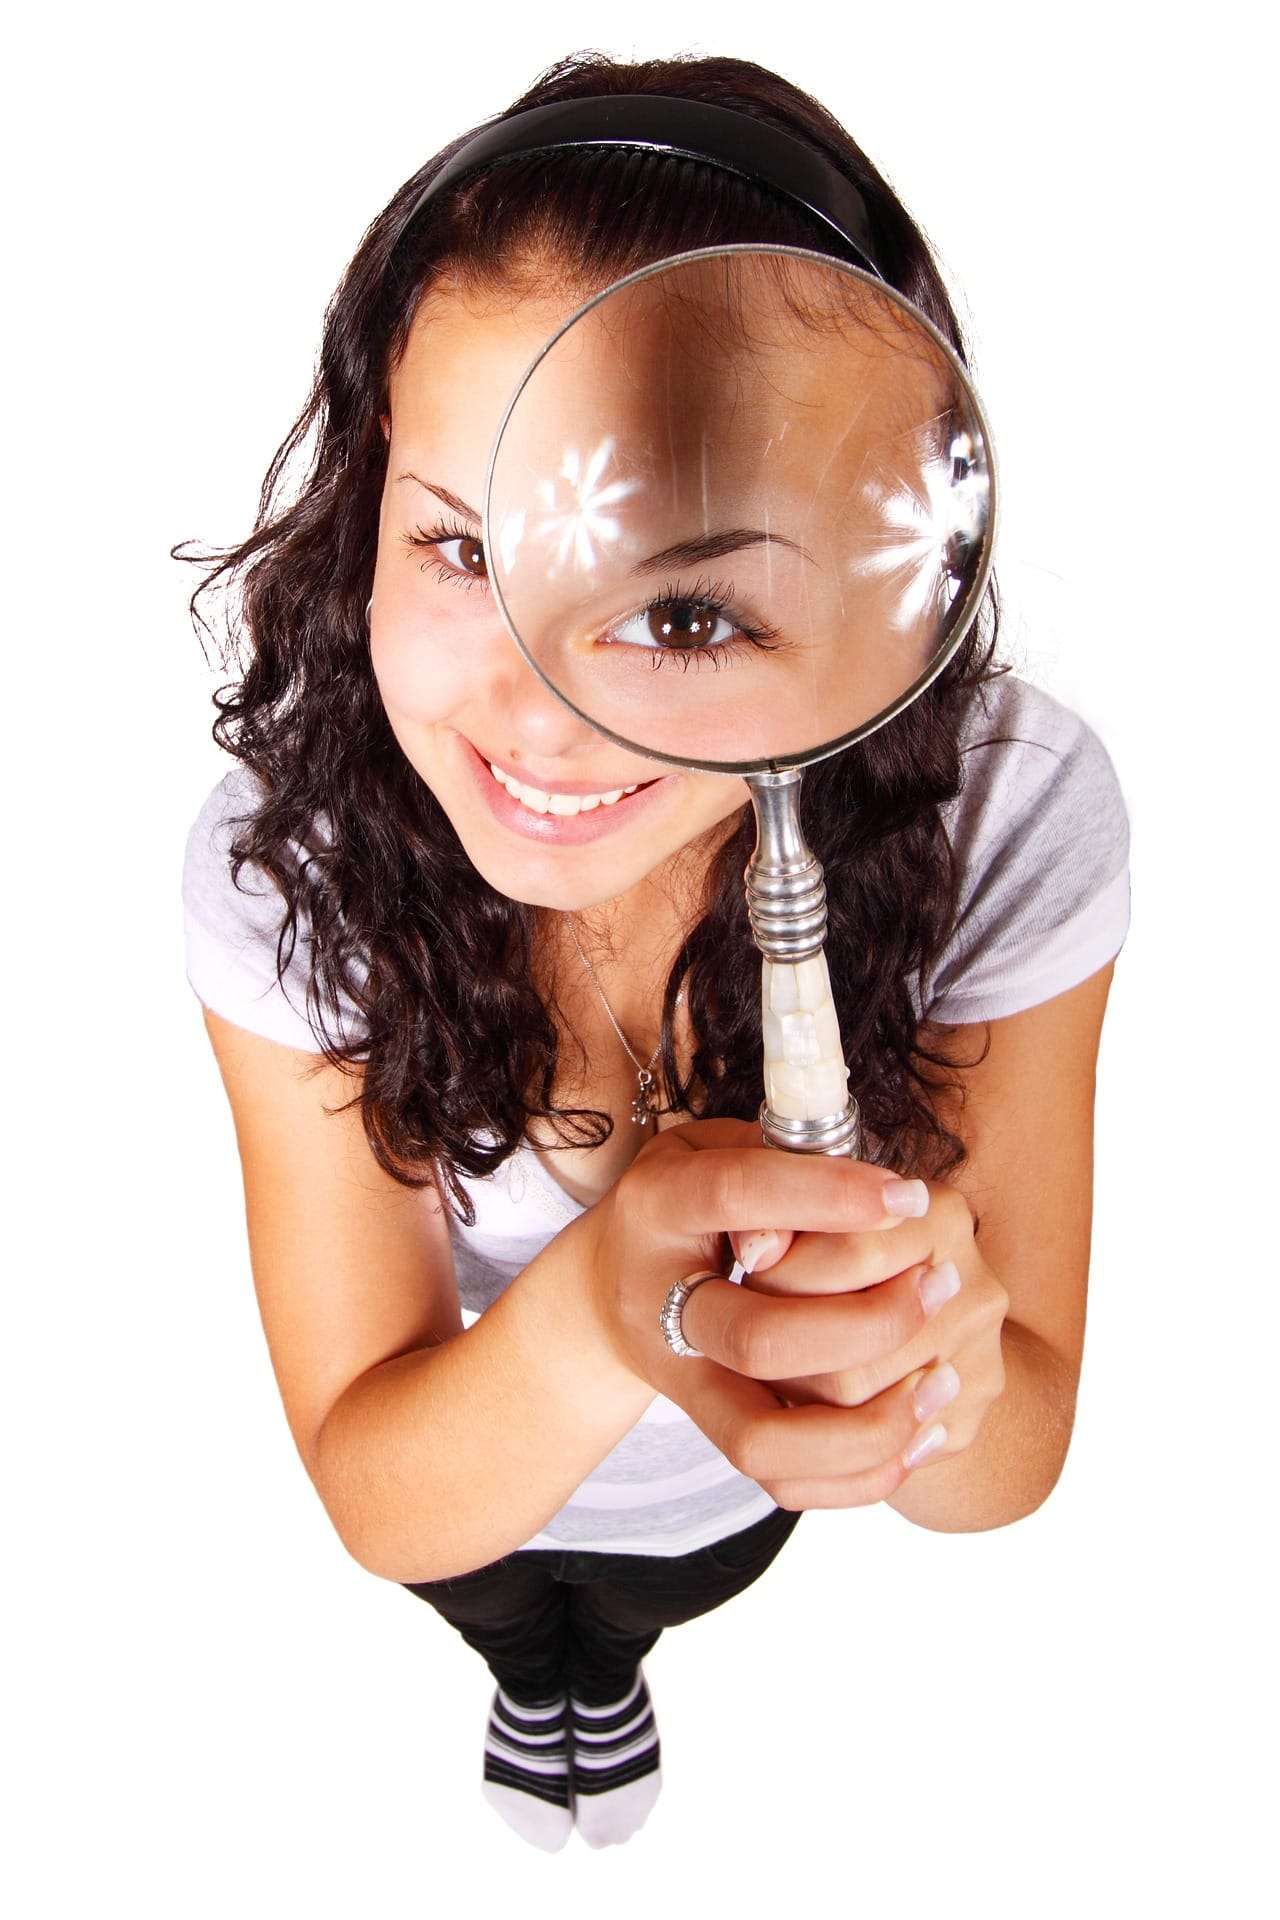 Image of a girl and magnifying lens, for article title: What's in a name? Your domain name and email address are EVERYTHING.